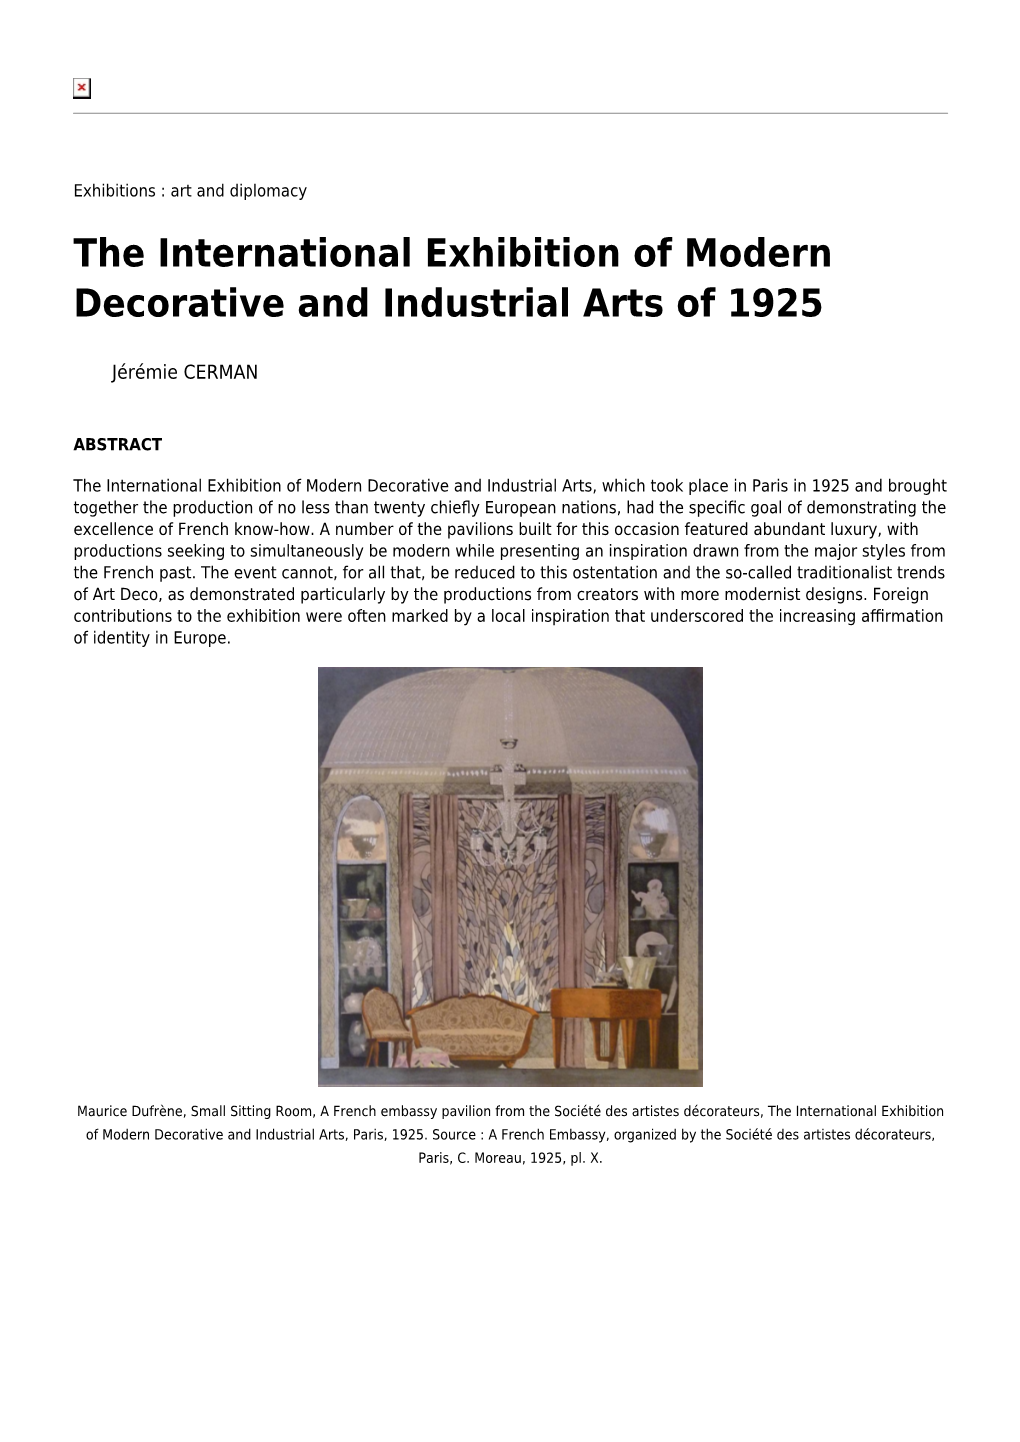 The International Exhibition of Modern Decorative and Industrial Arts of 1925